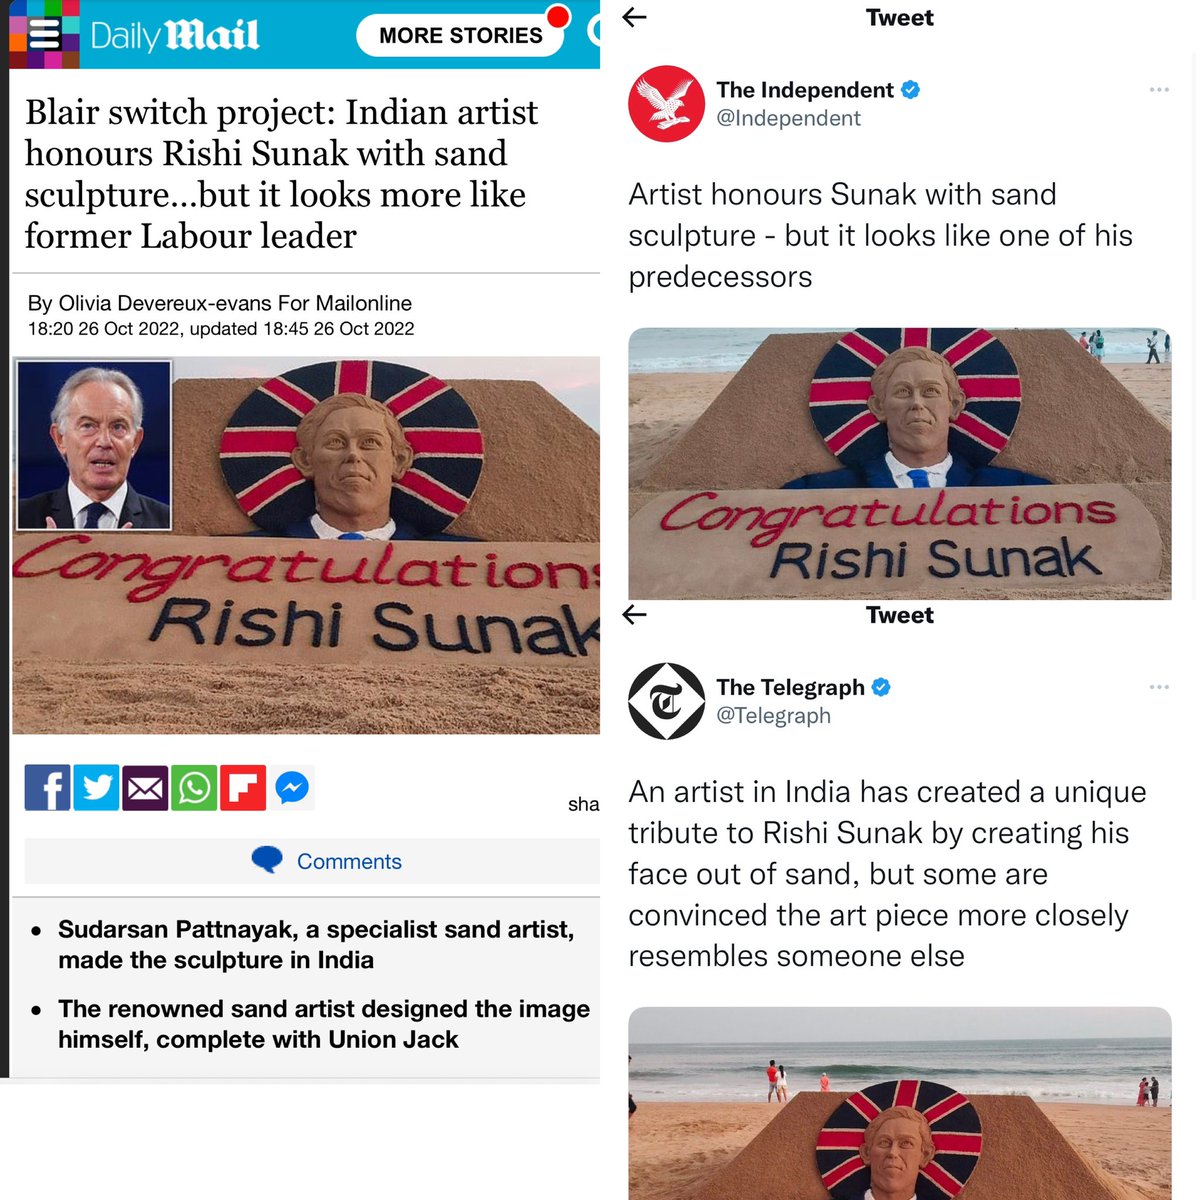 I would like to clarify, My sand sculpture was on newly appointed UK PM @RishiSunak. As an Artist I have tried my best to portray Mr Rishi Sunak through my sand art. It was my only intention to congratulate Mr Sunak and nothing else.